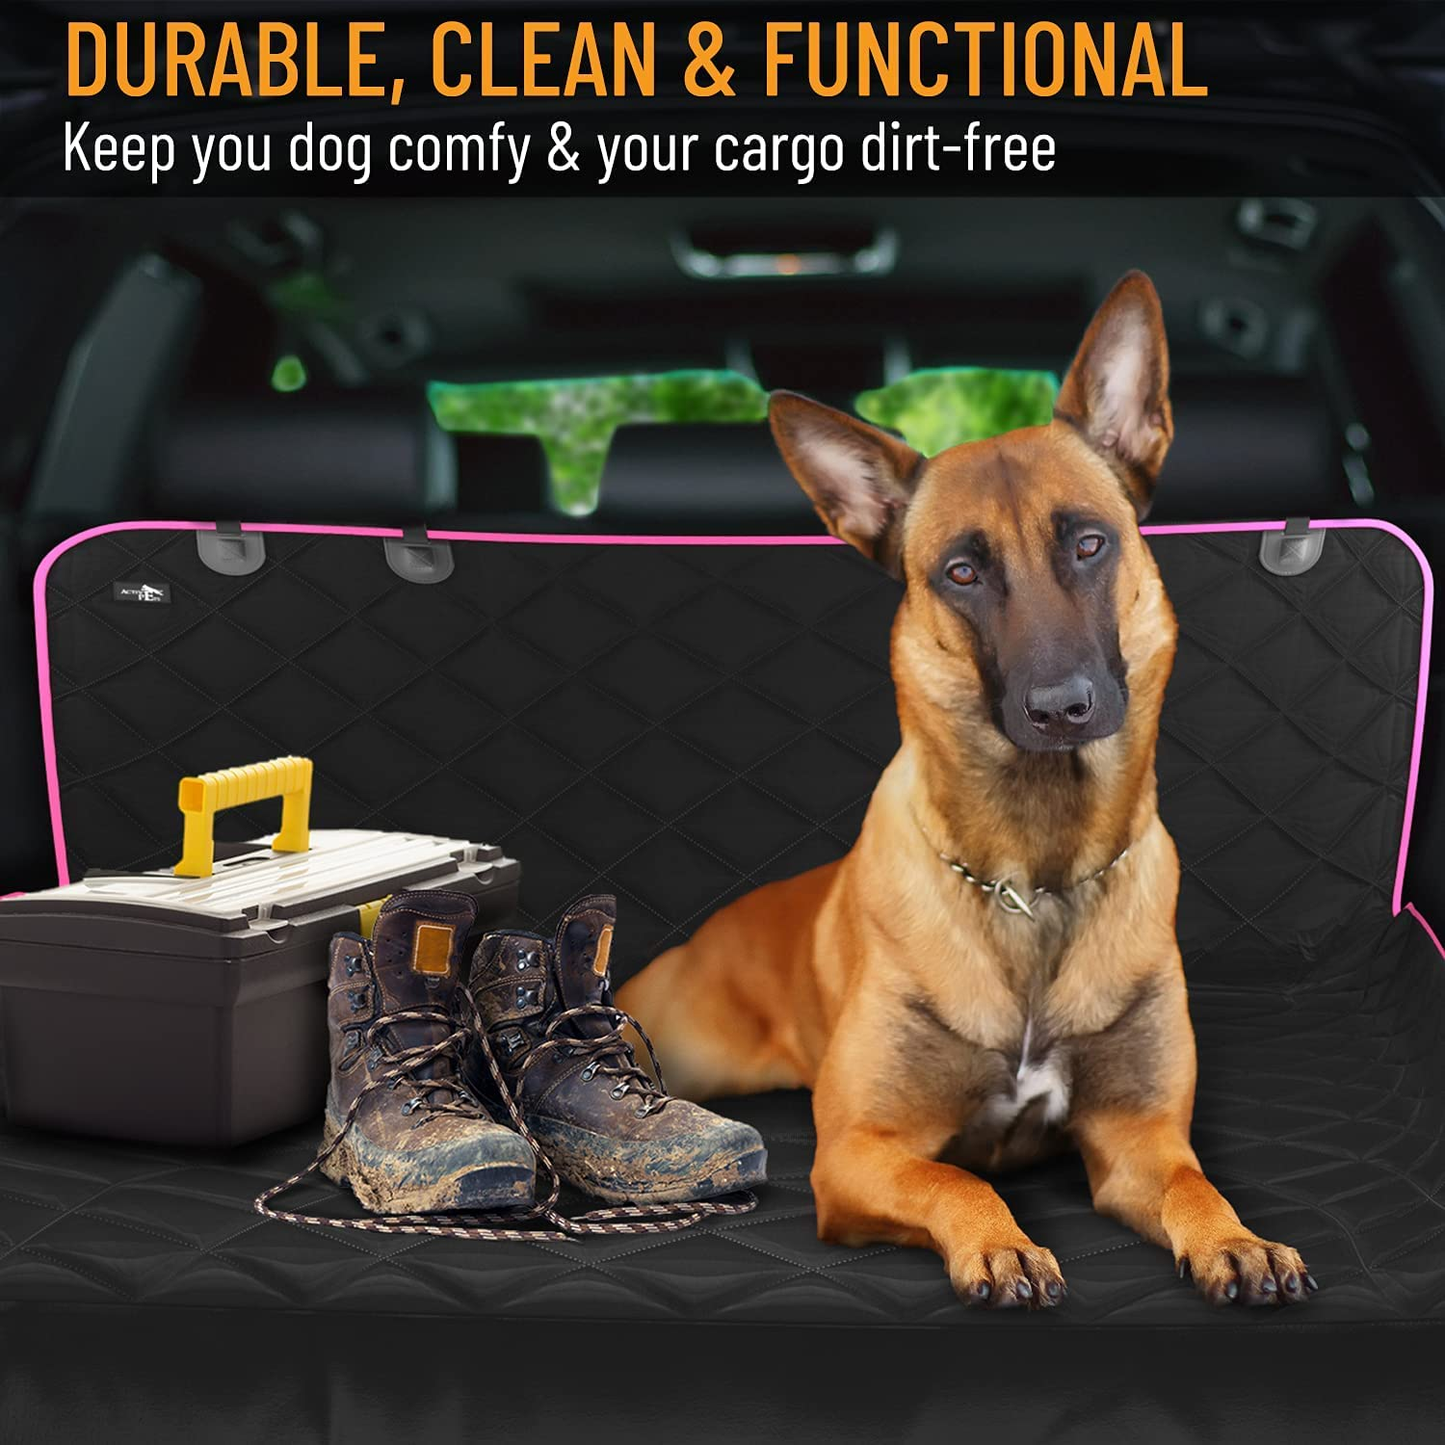 SUV Cargo Liner, Durable Non Slip Dog Seat Cover, Dog Cargo Liner SUV Protects against Dirt & Fur, Pet Cargo Liner for SUV & Trucks, Large Size Trunk Cover for Dogs Universal Fit